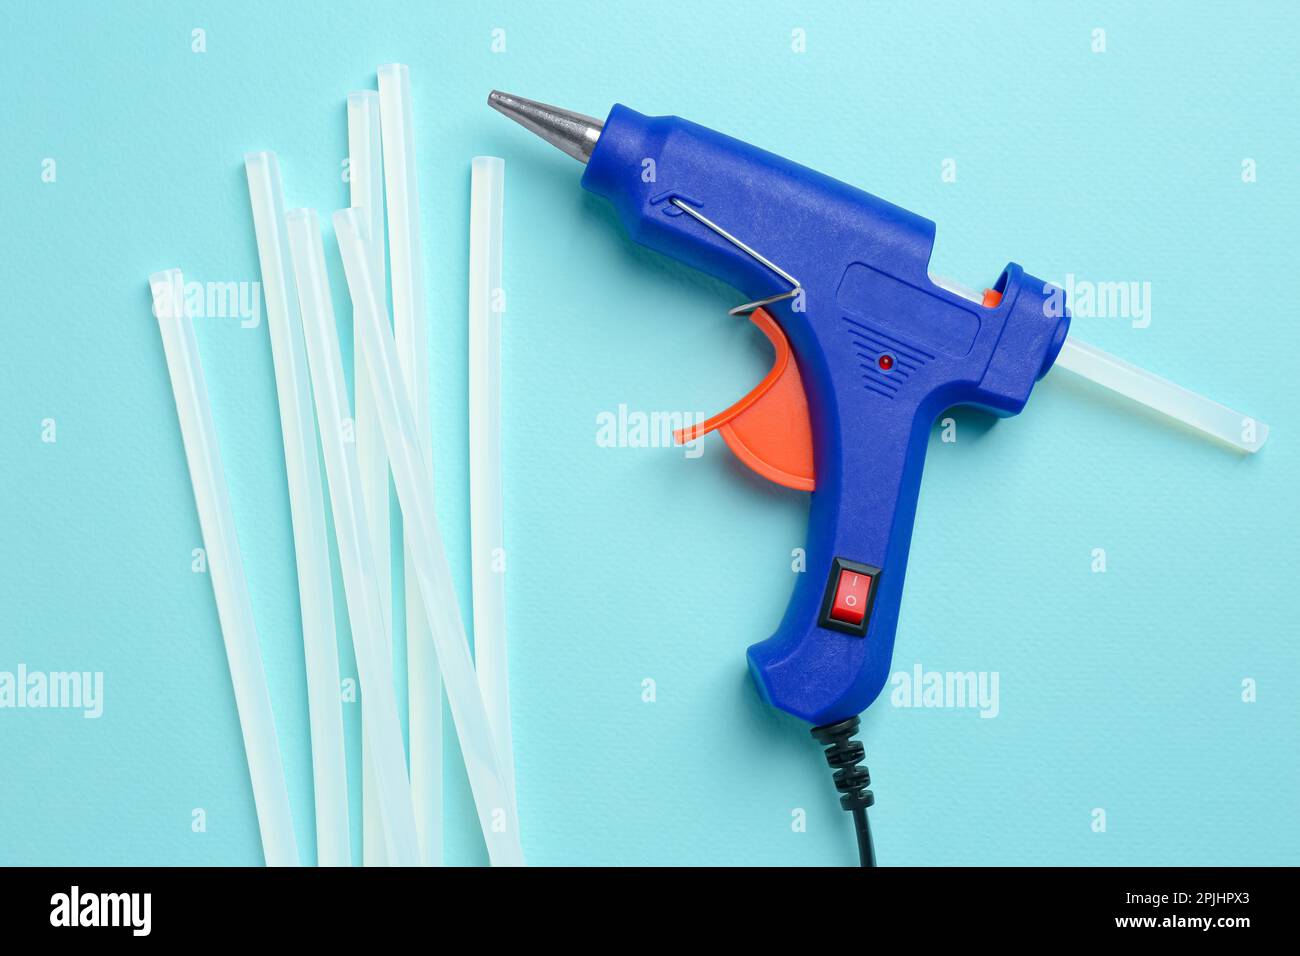 Blue glue gun and sticks on turquoise background, flat lay Stock Photo